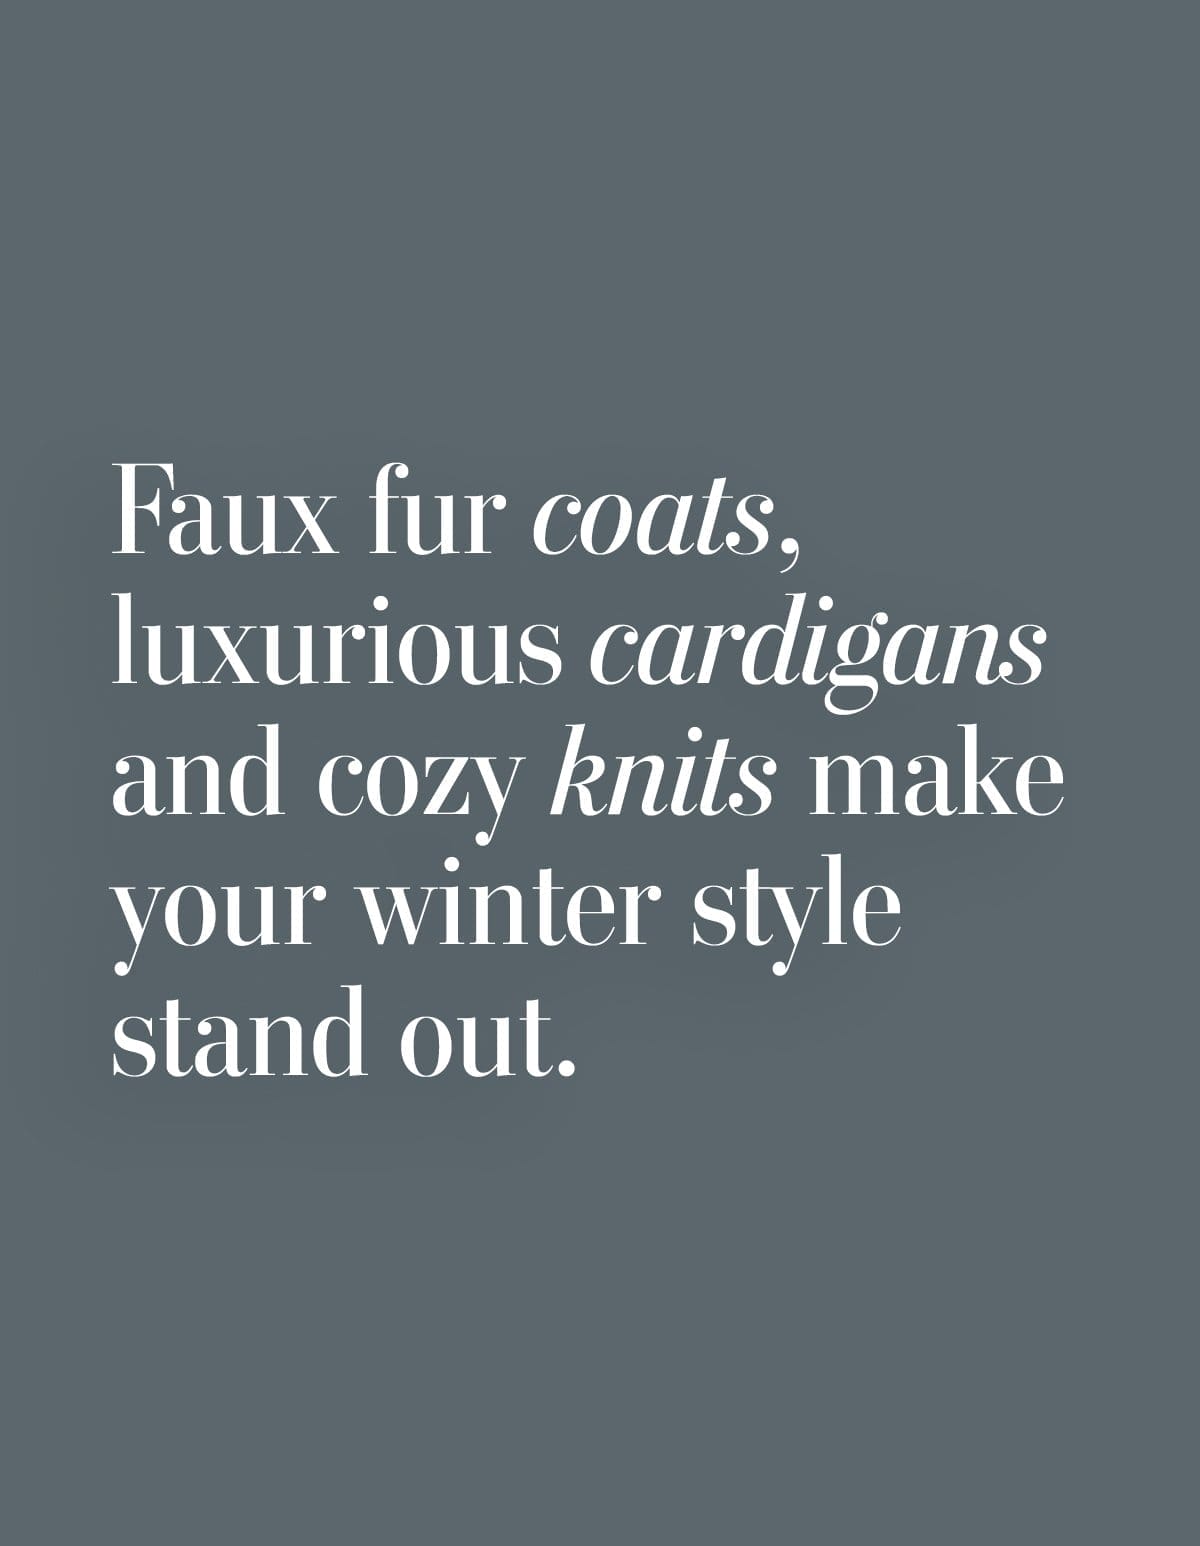 Faux fur coats, luxurious cardigans and cozy knits make your winter style stand out.